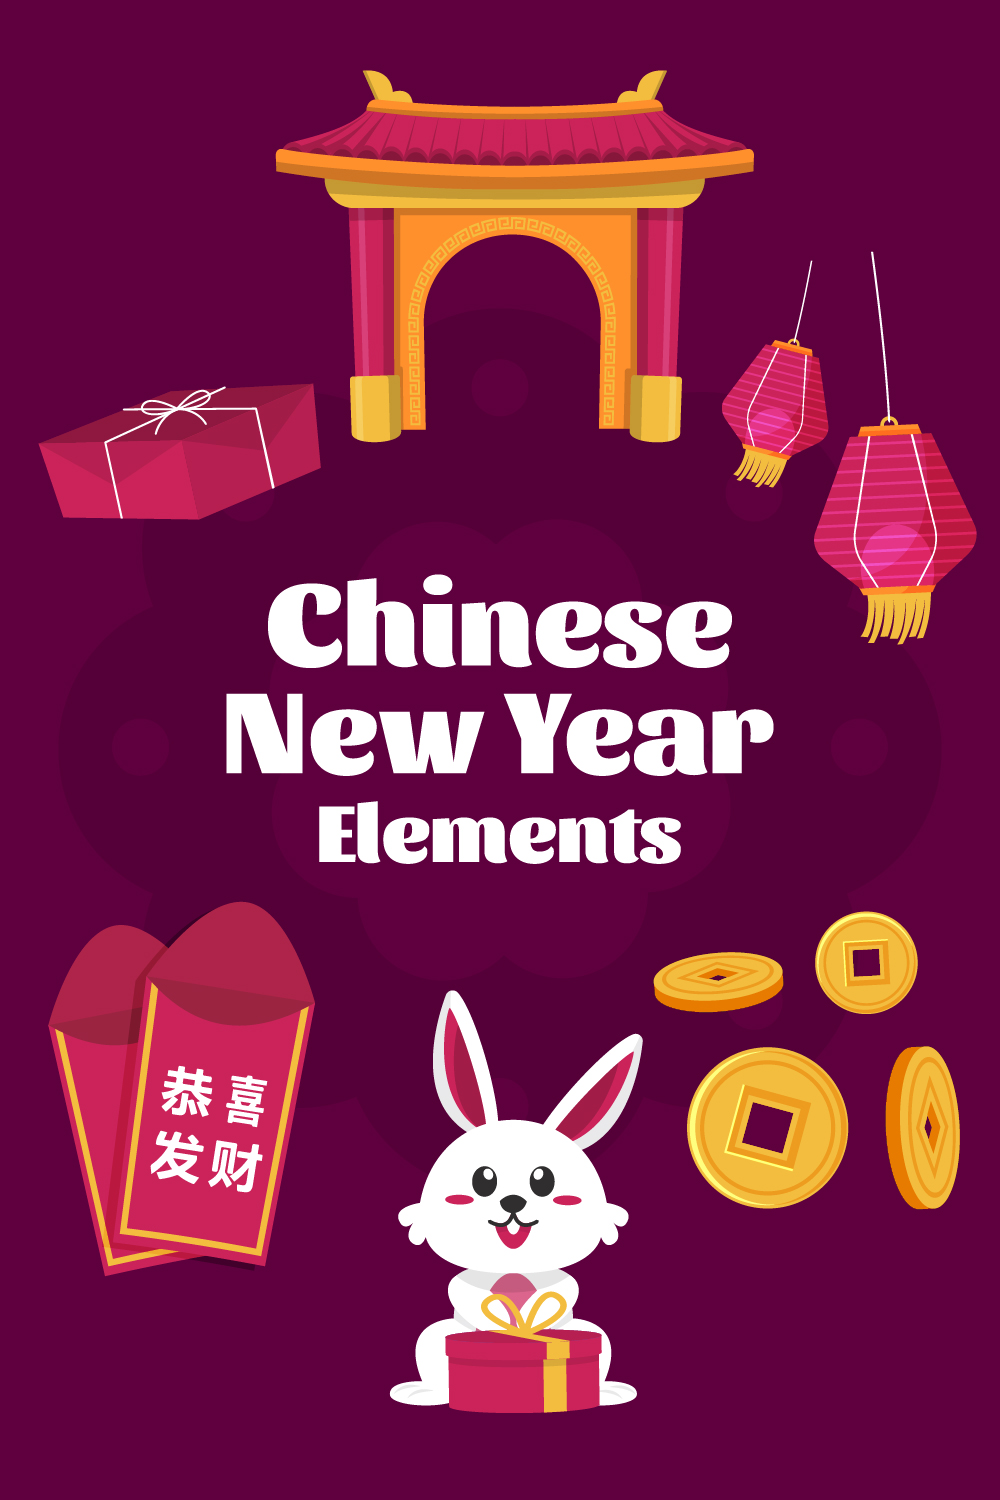 Chinese New Year Elements Illustration - Only $12 pinterest preview image.